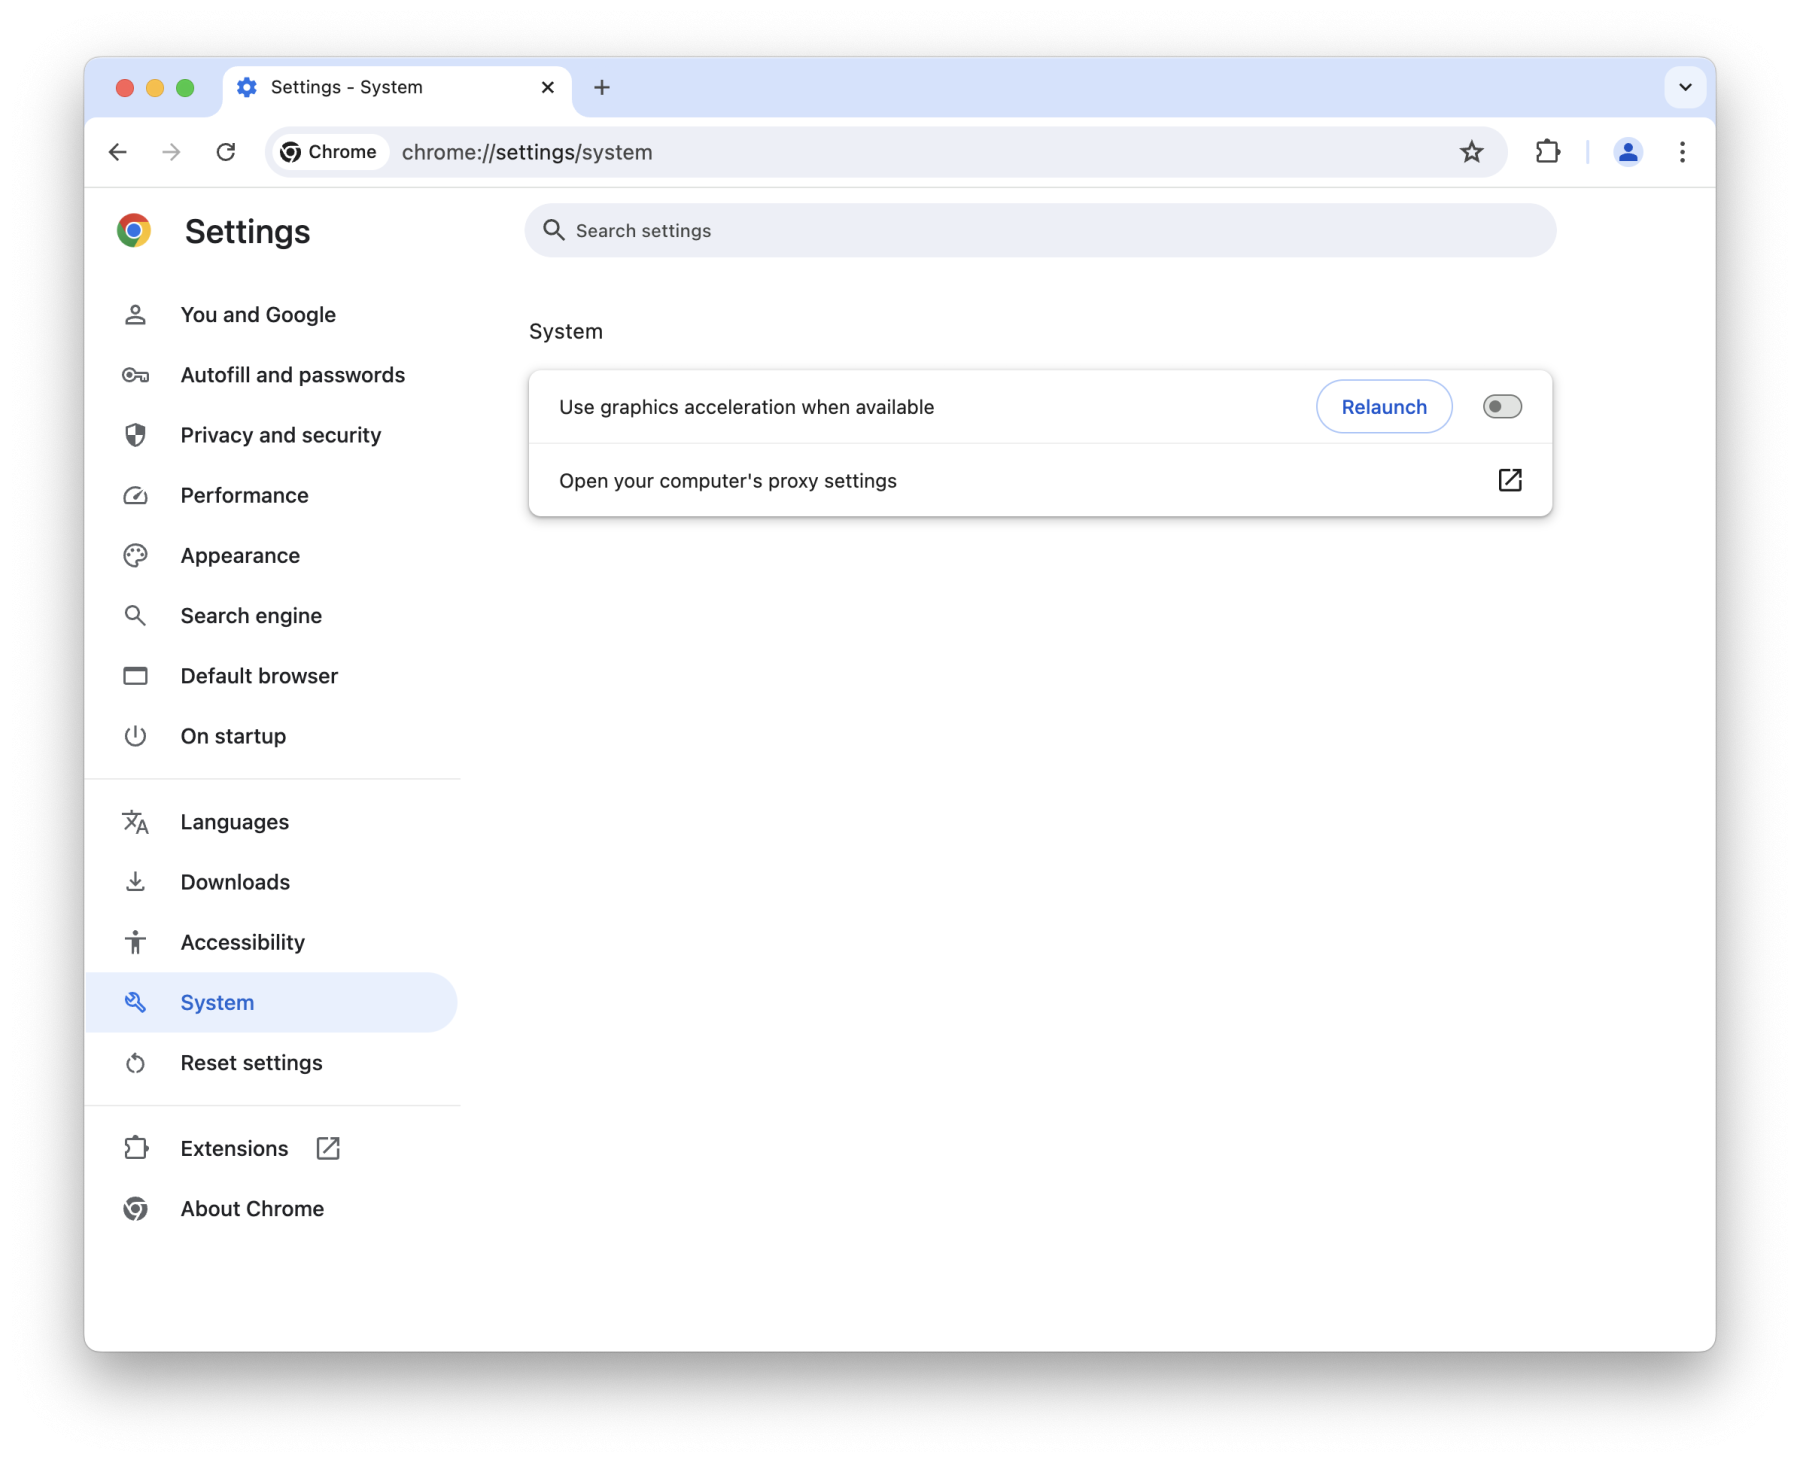 Disable hardware acceleration in Chrome settings